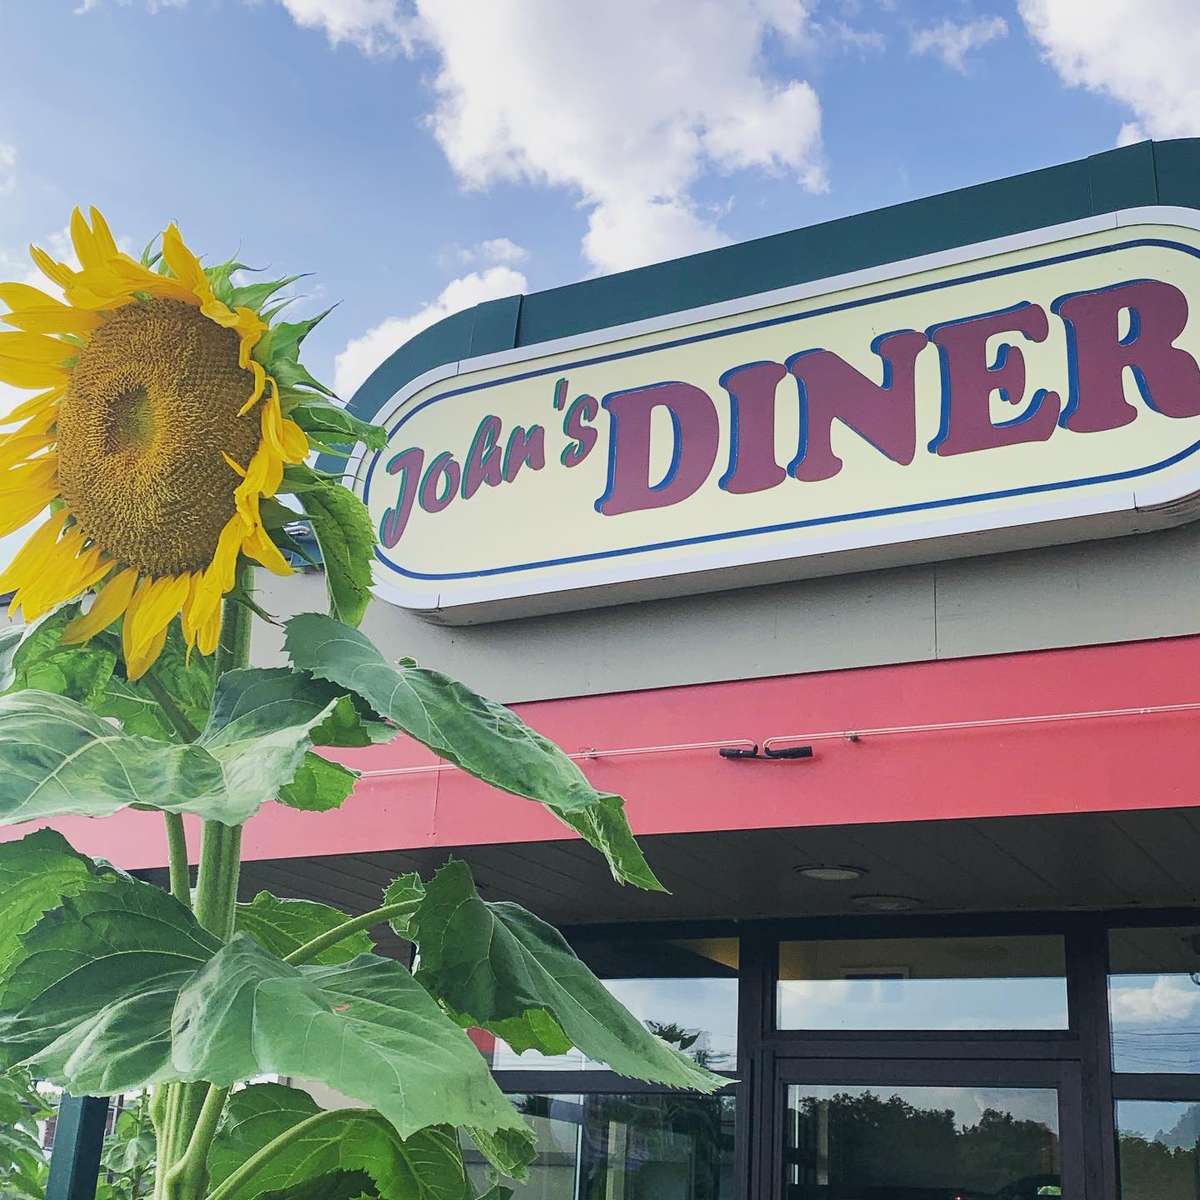 Exterior of John's Diner with the sign, a blue sky with clouds and a sunflower